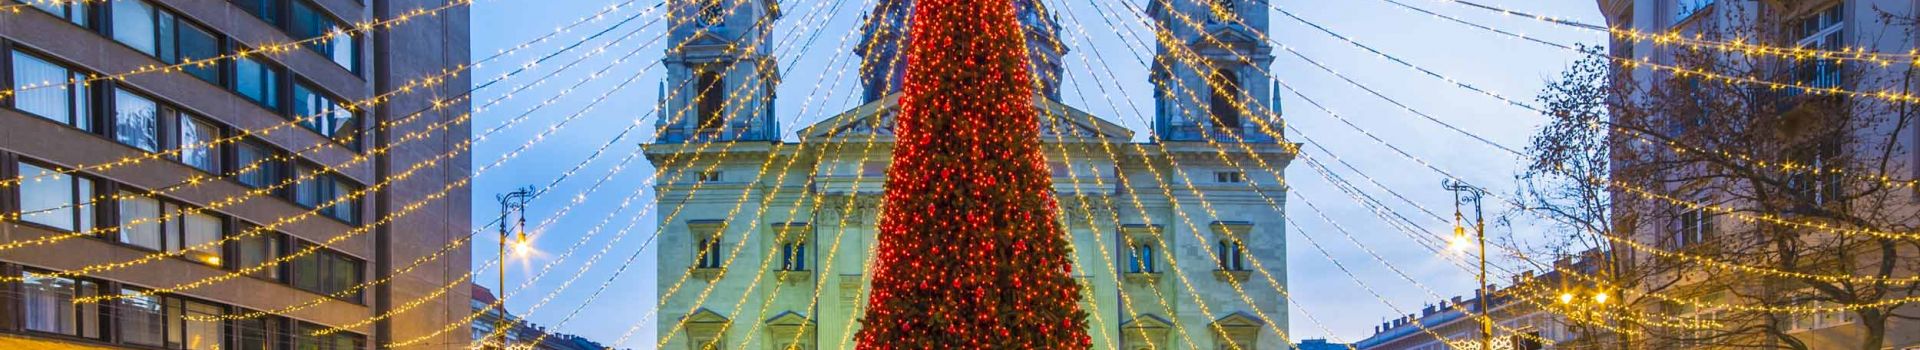 Christmas market deals in Budapest with Cassidy Travel